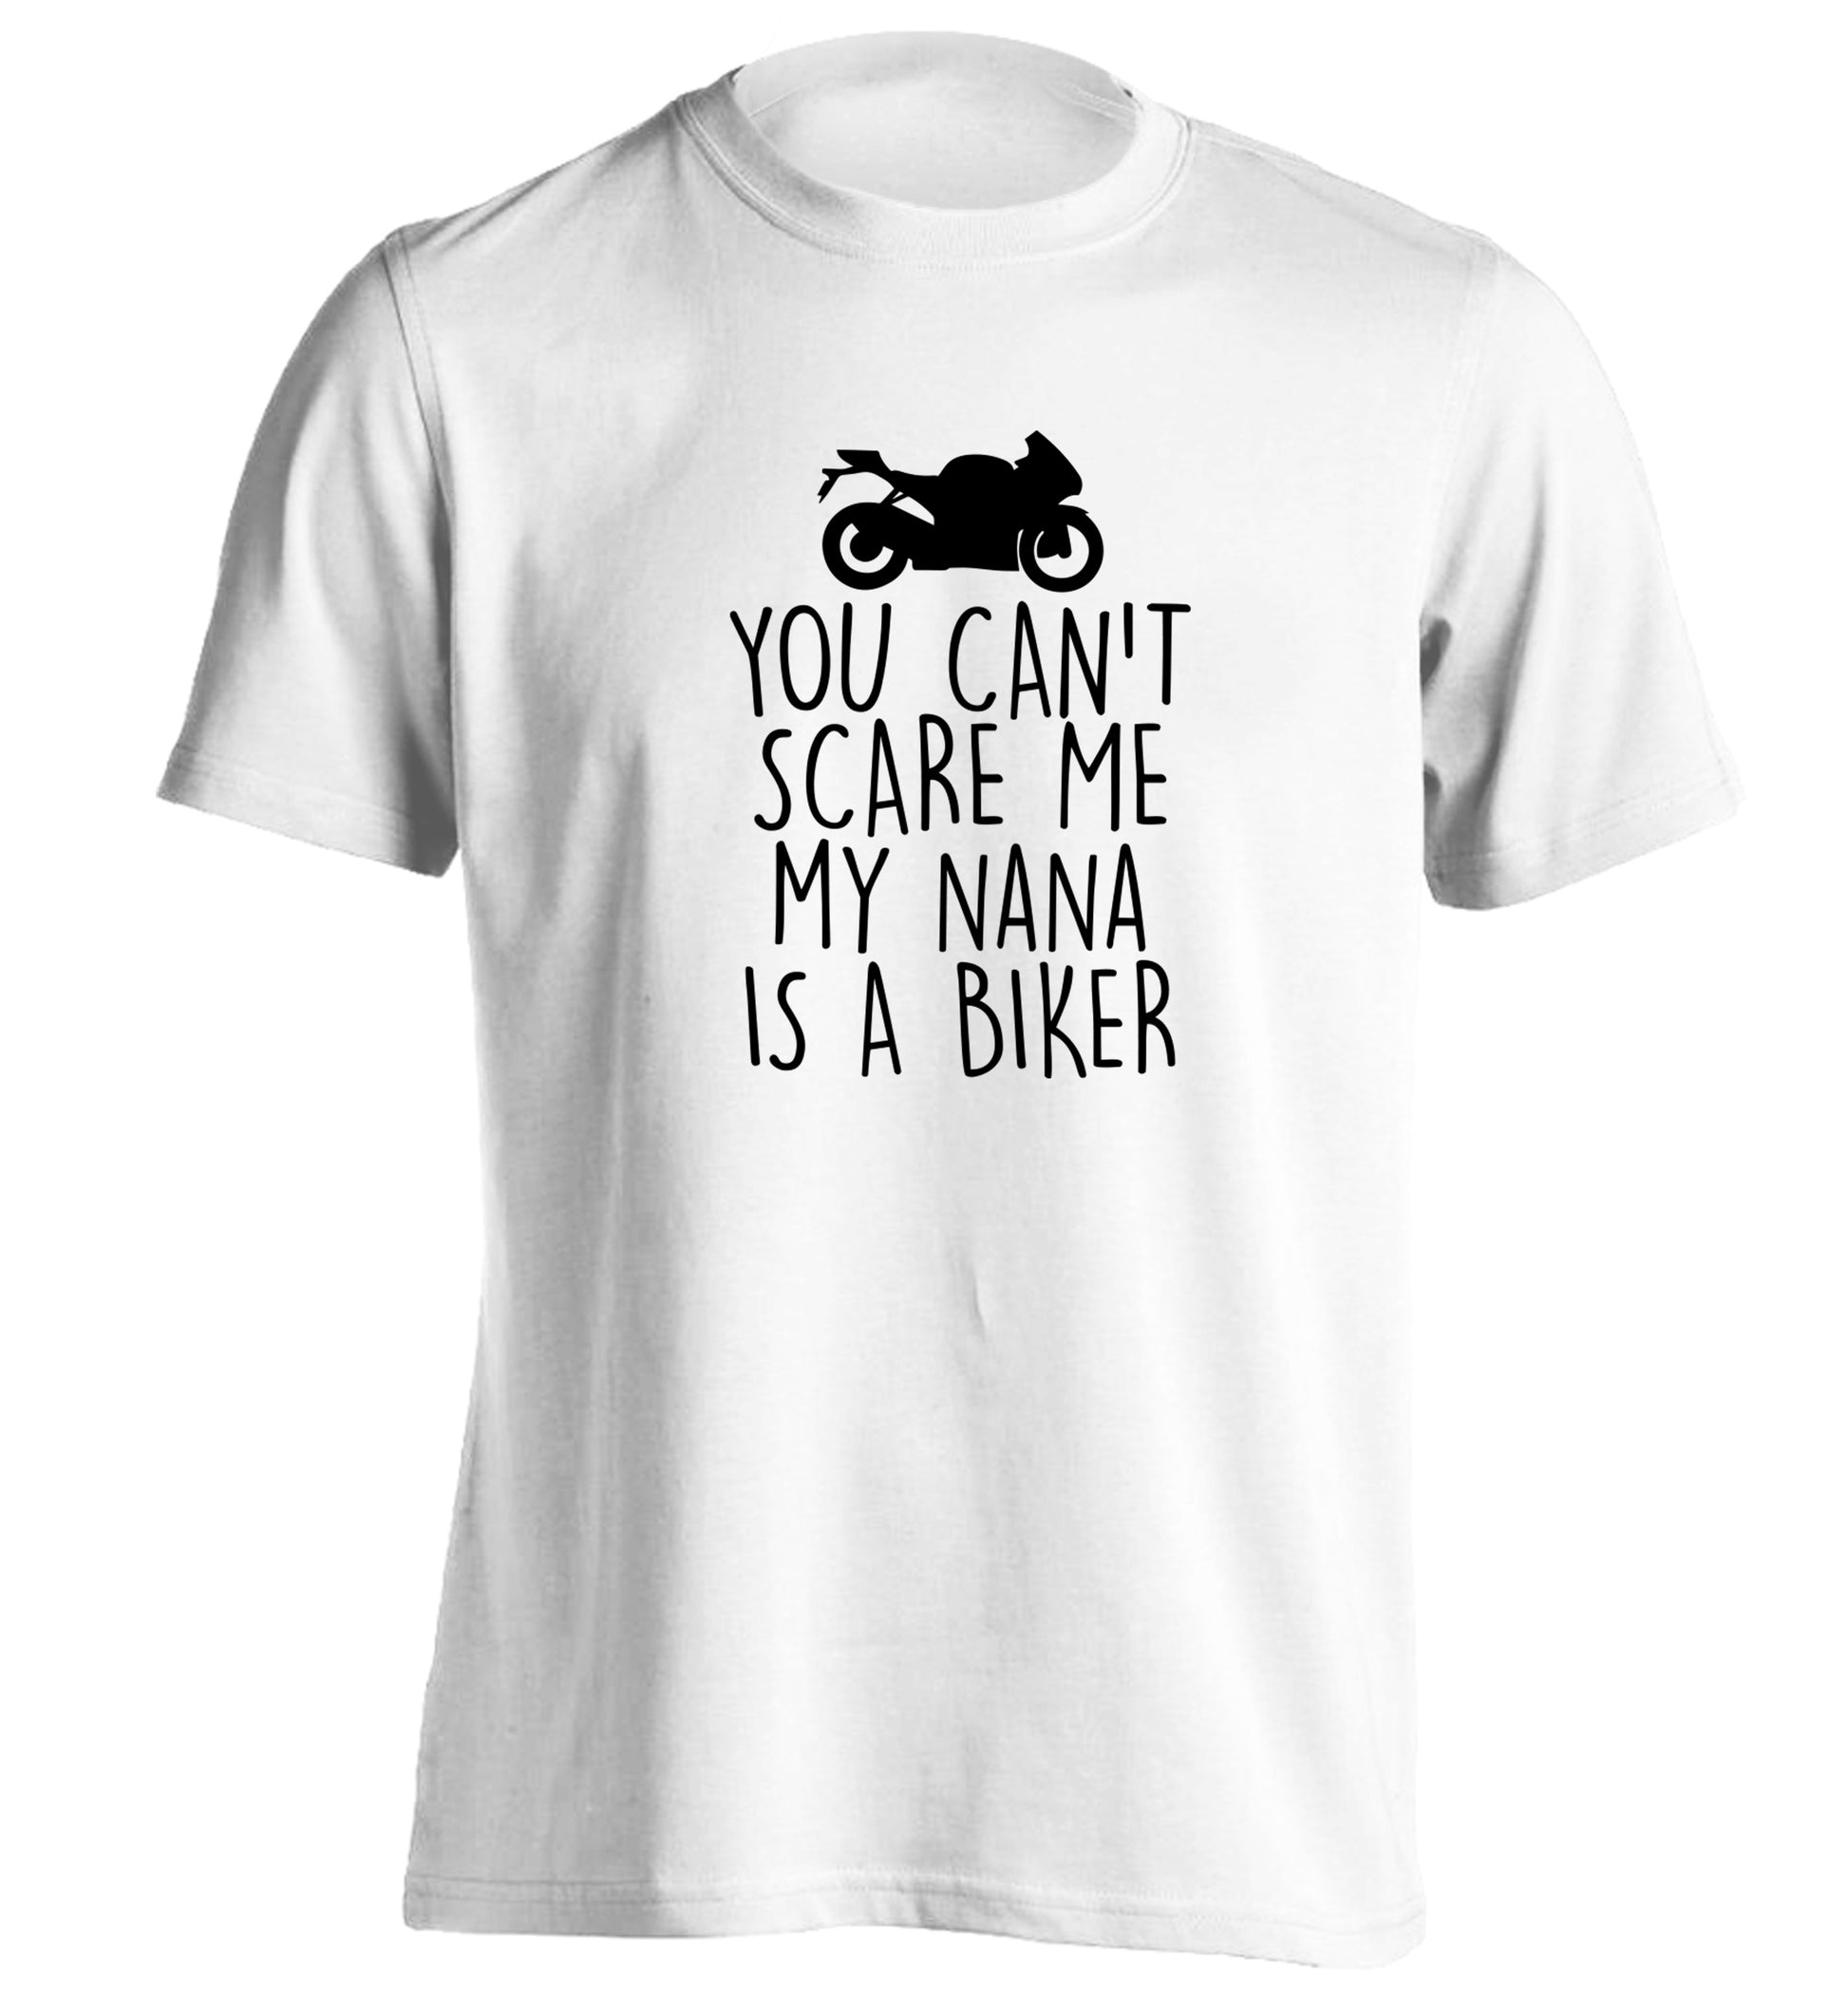 You can't scare me my nana is a biker adults unisex white Tshirt 2XL